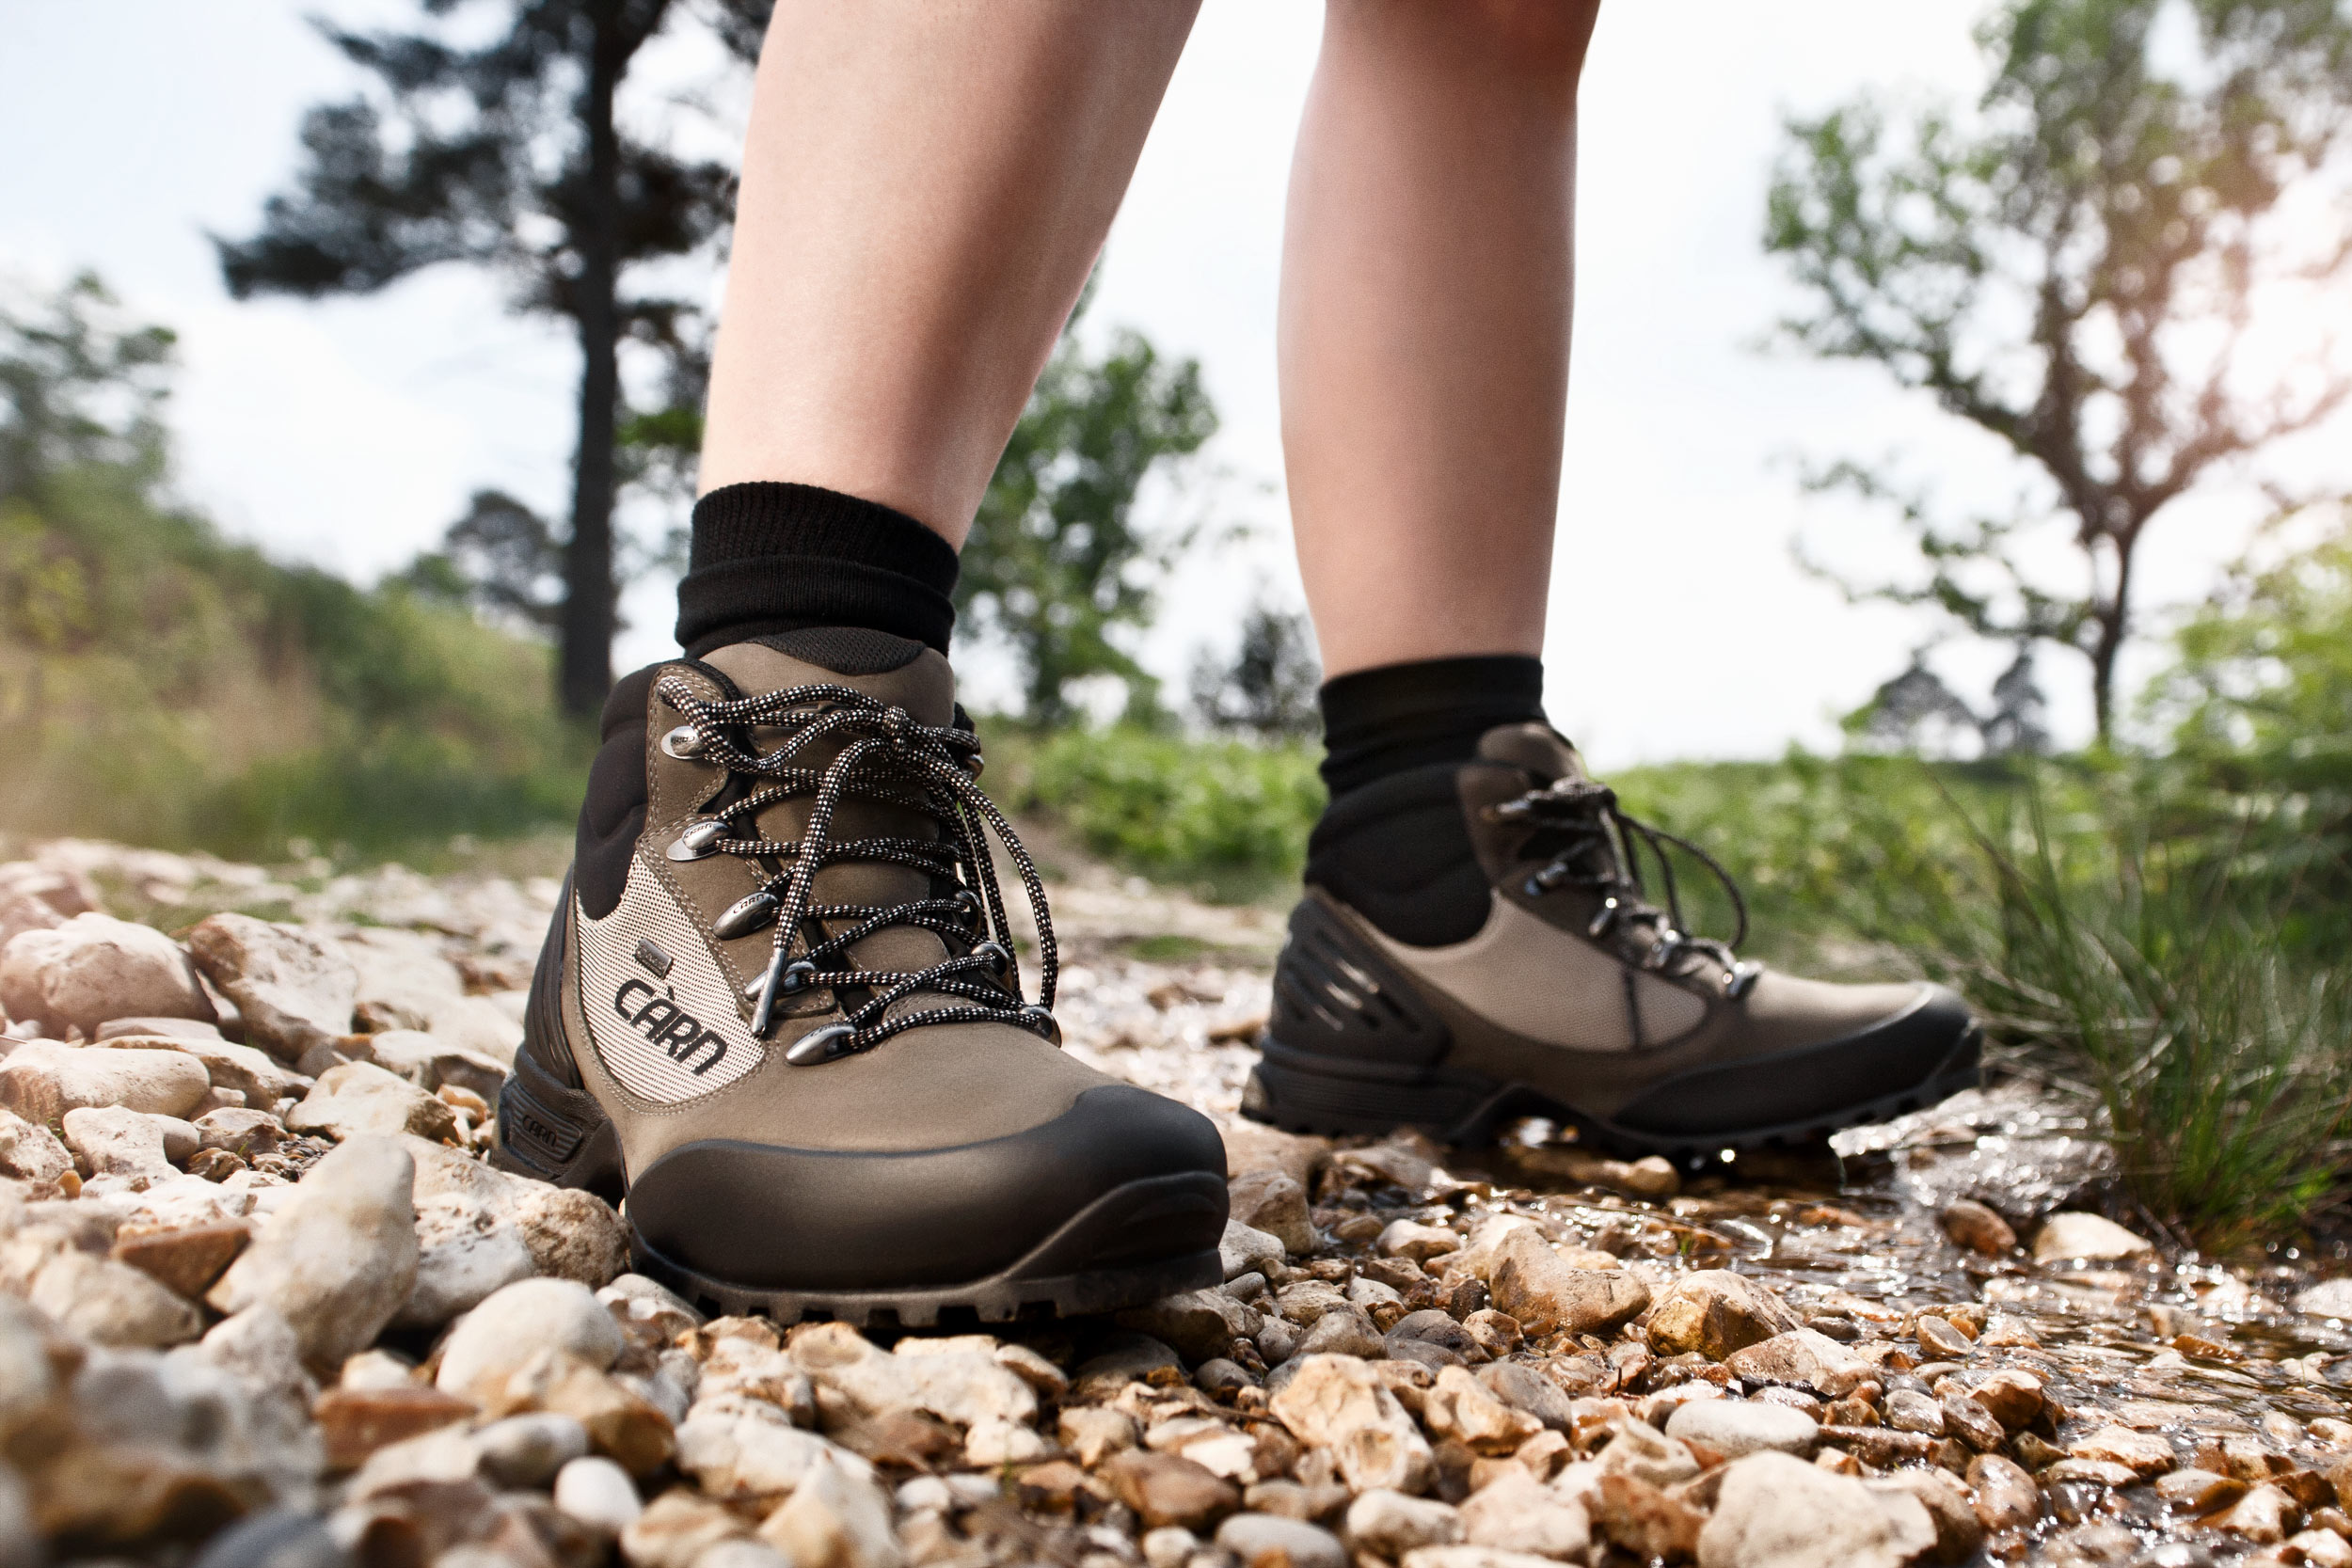 Location product photography - pair of feet standing in stream wearing rugged walking shoes